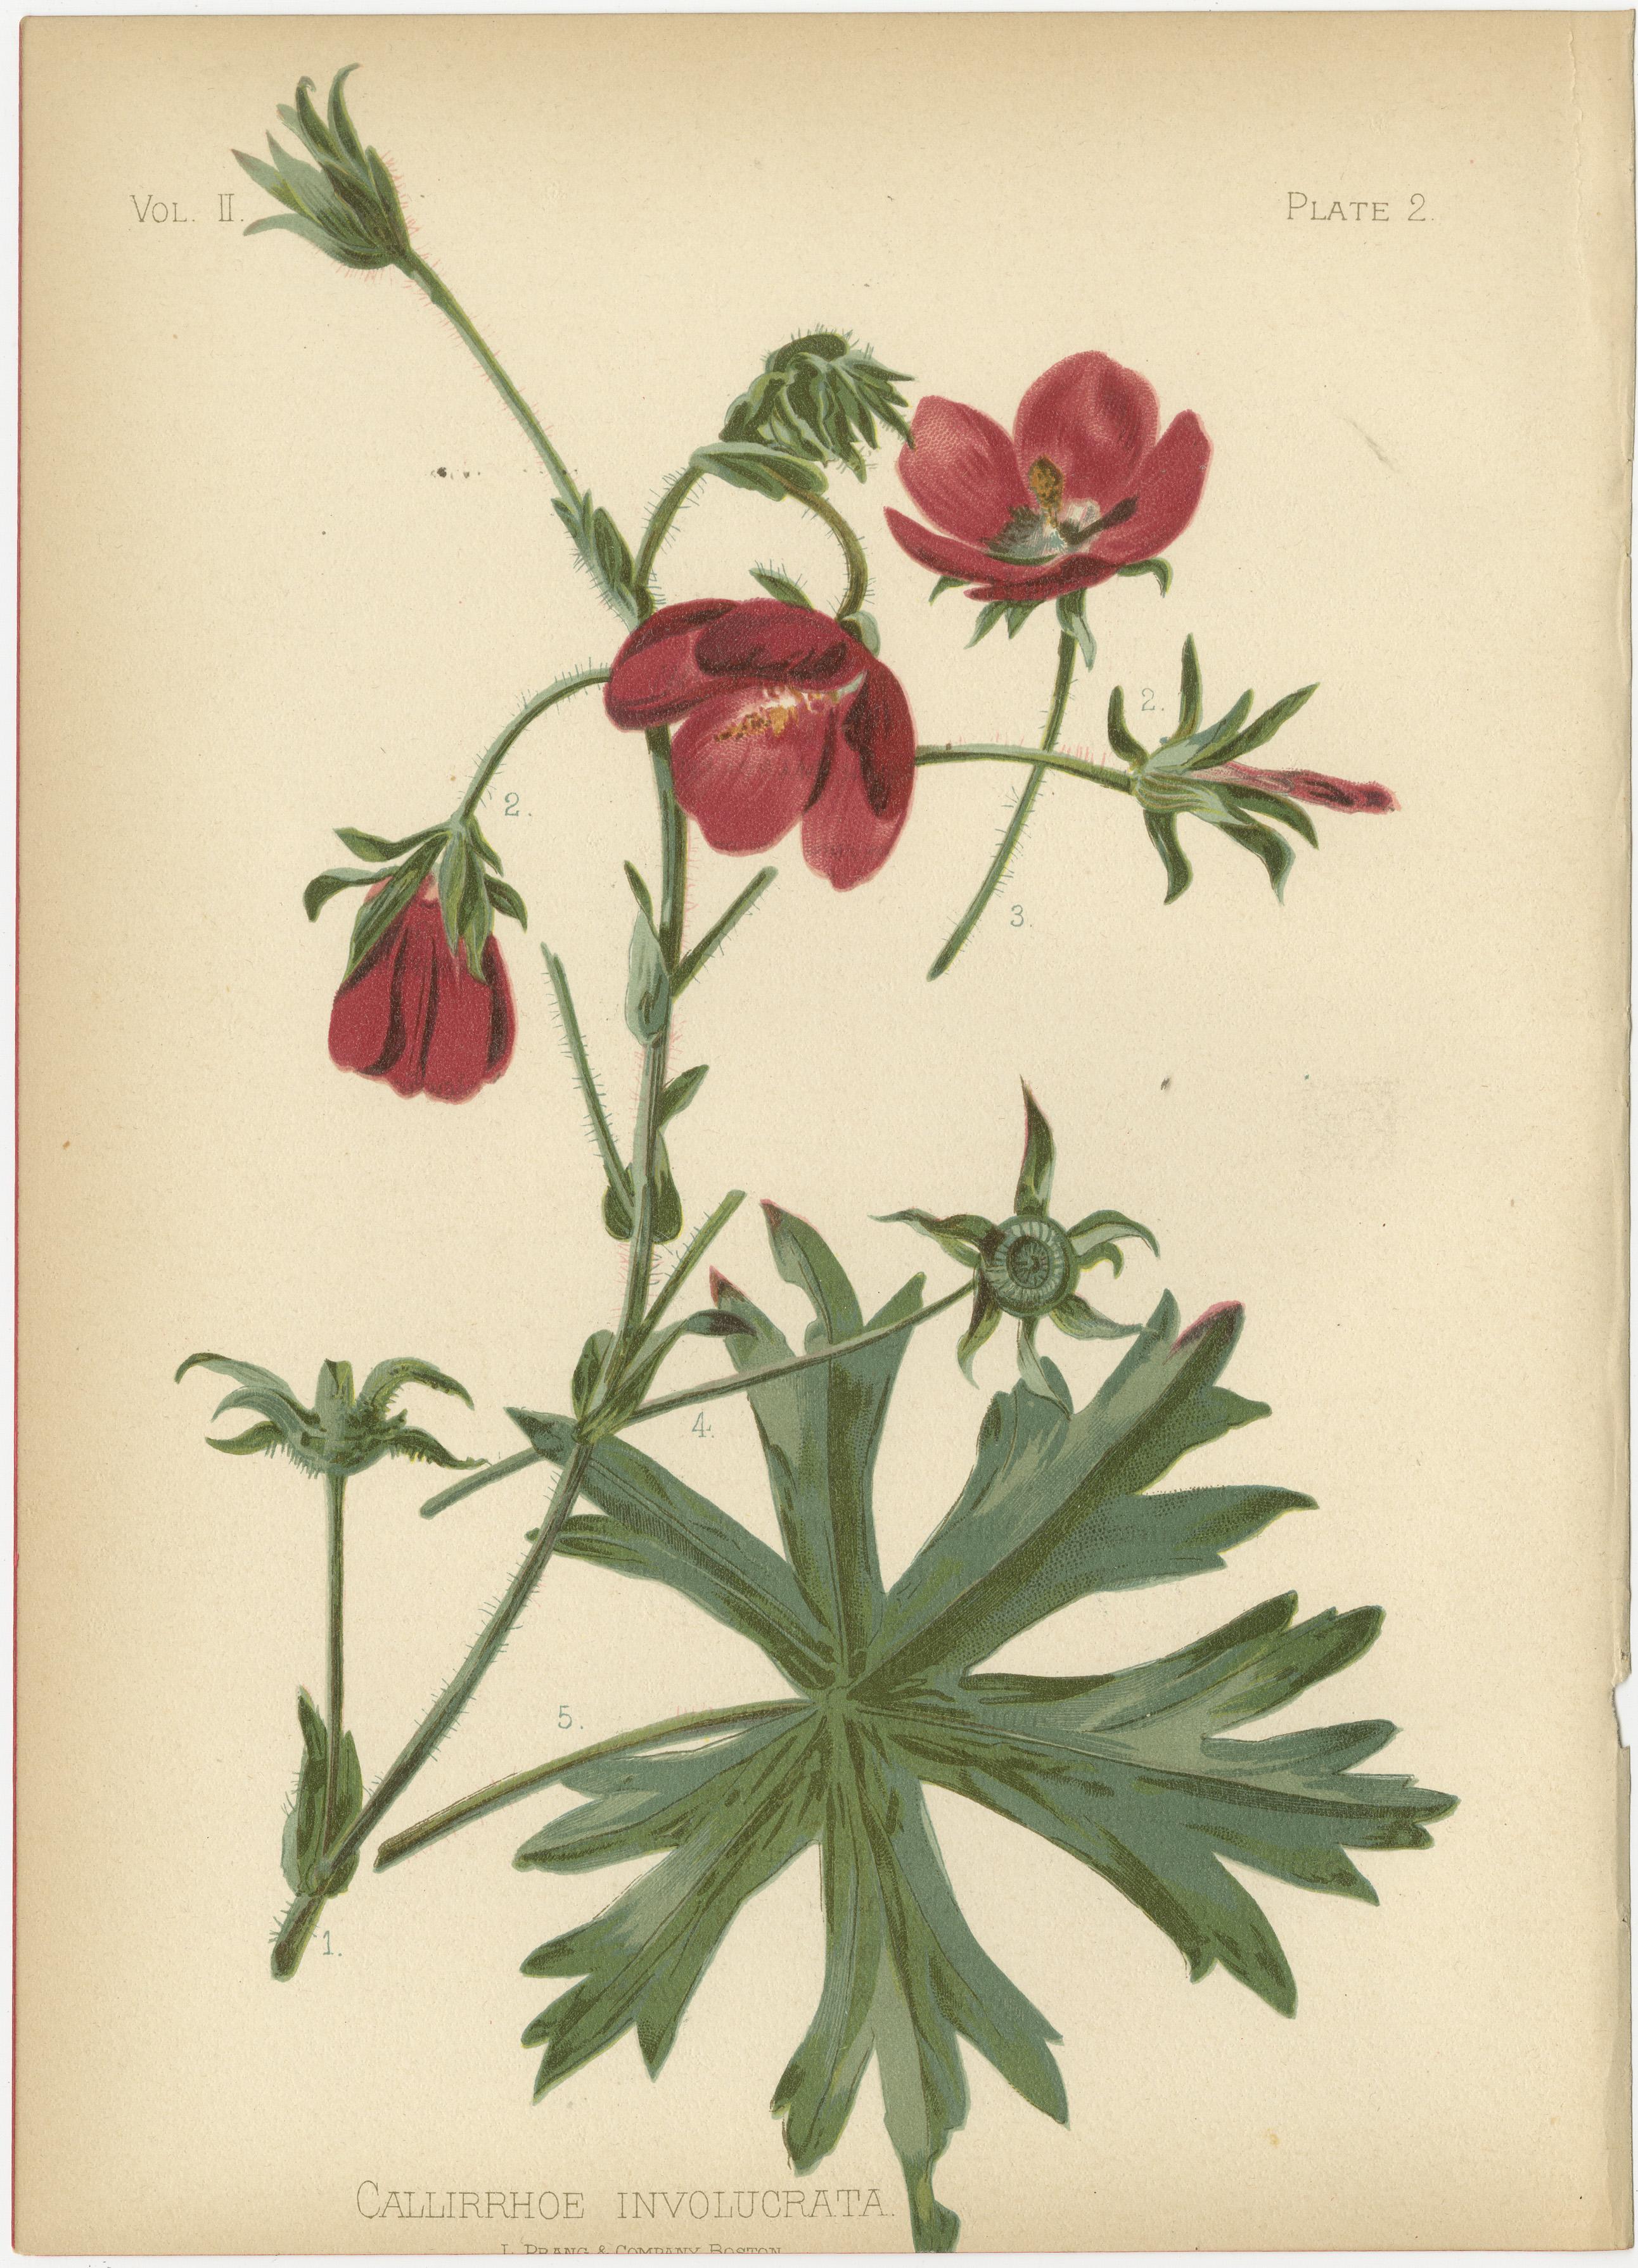 The offer  contains a collection of six original antique botanical illustrations, each depicting a different plant species. Here's a description of each flower, as typically represented in botanical artwork from the period of Thomas Meehan's